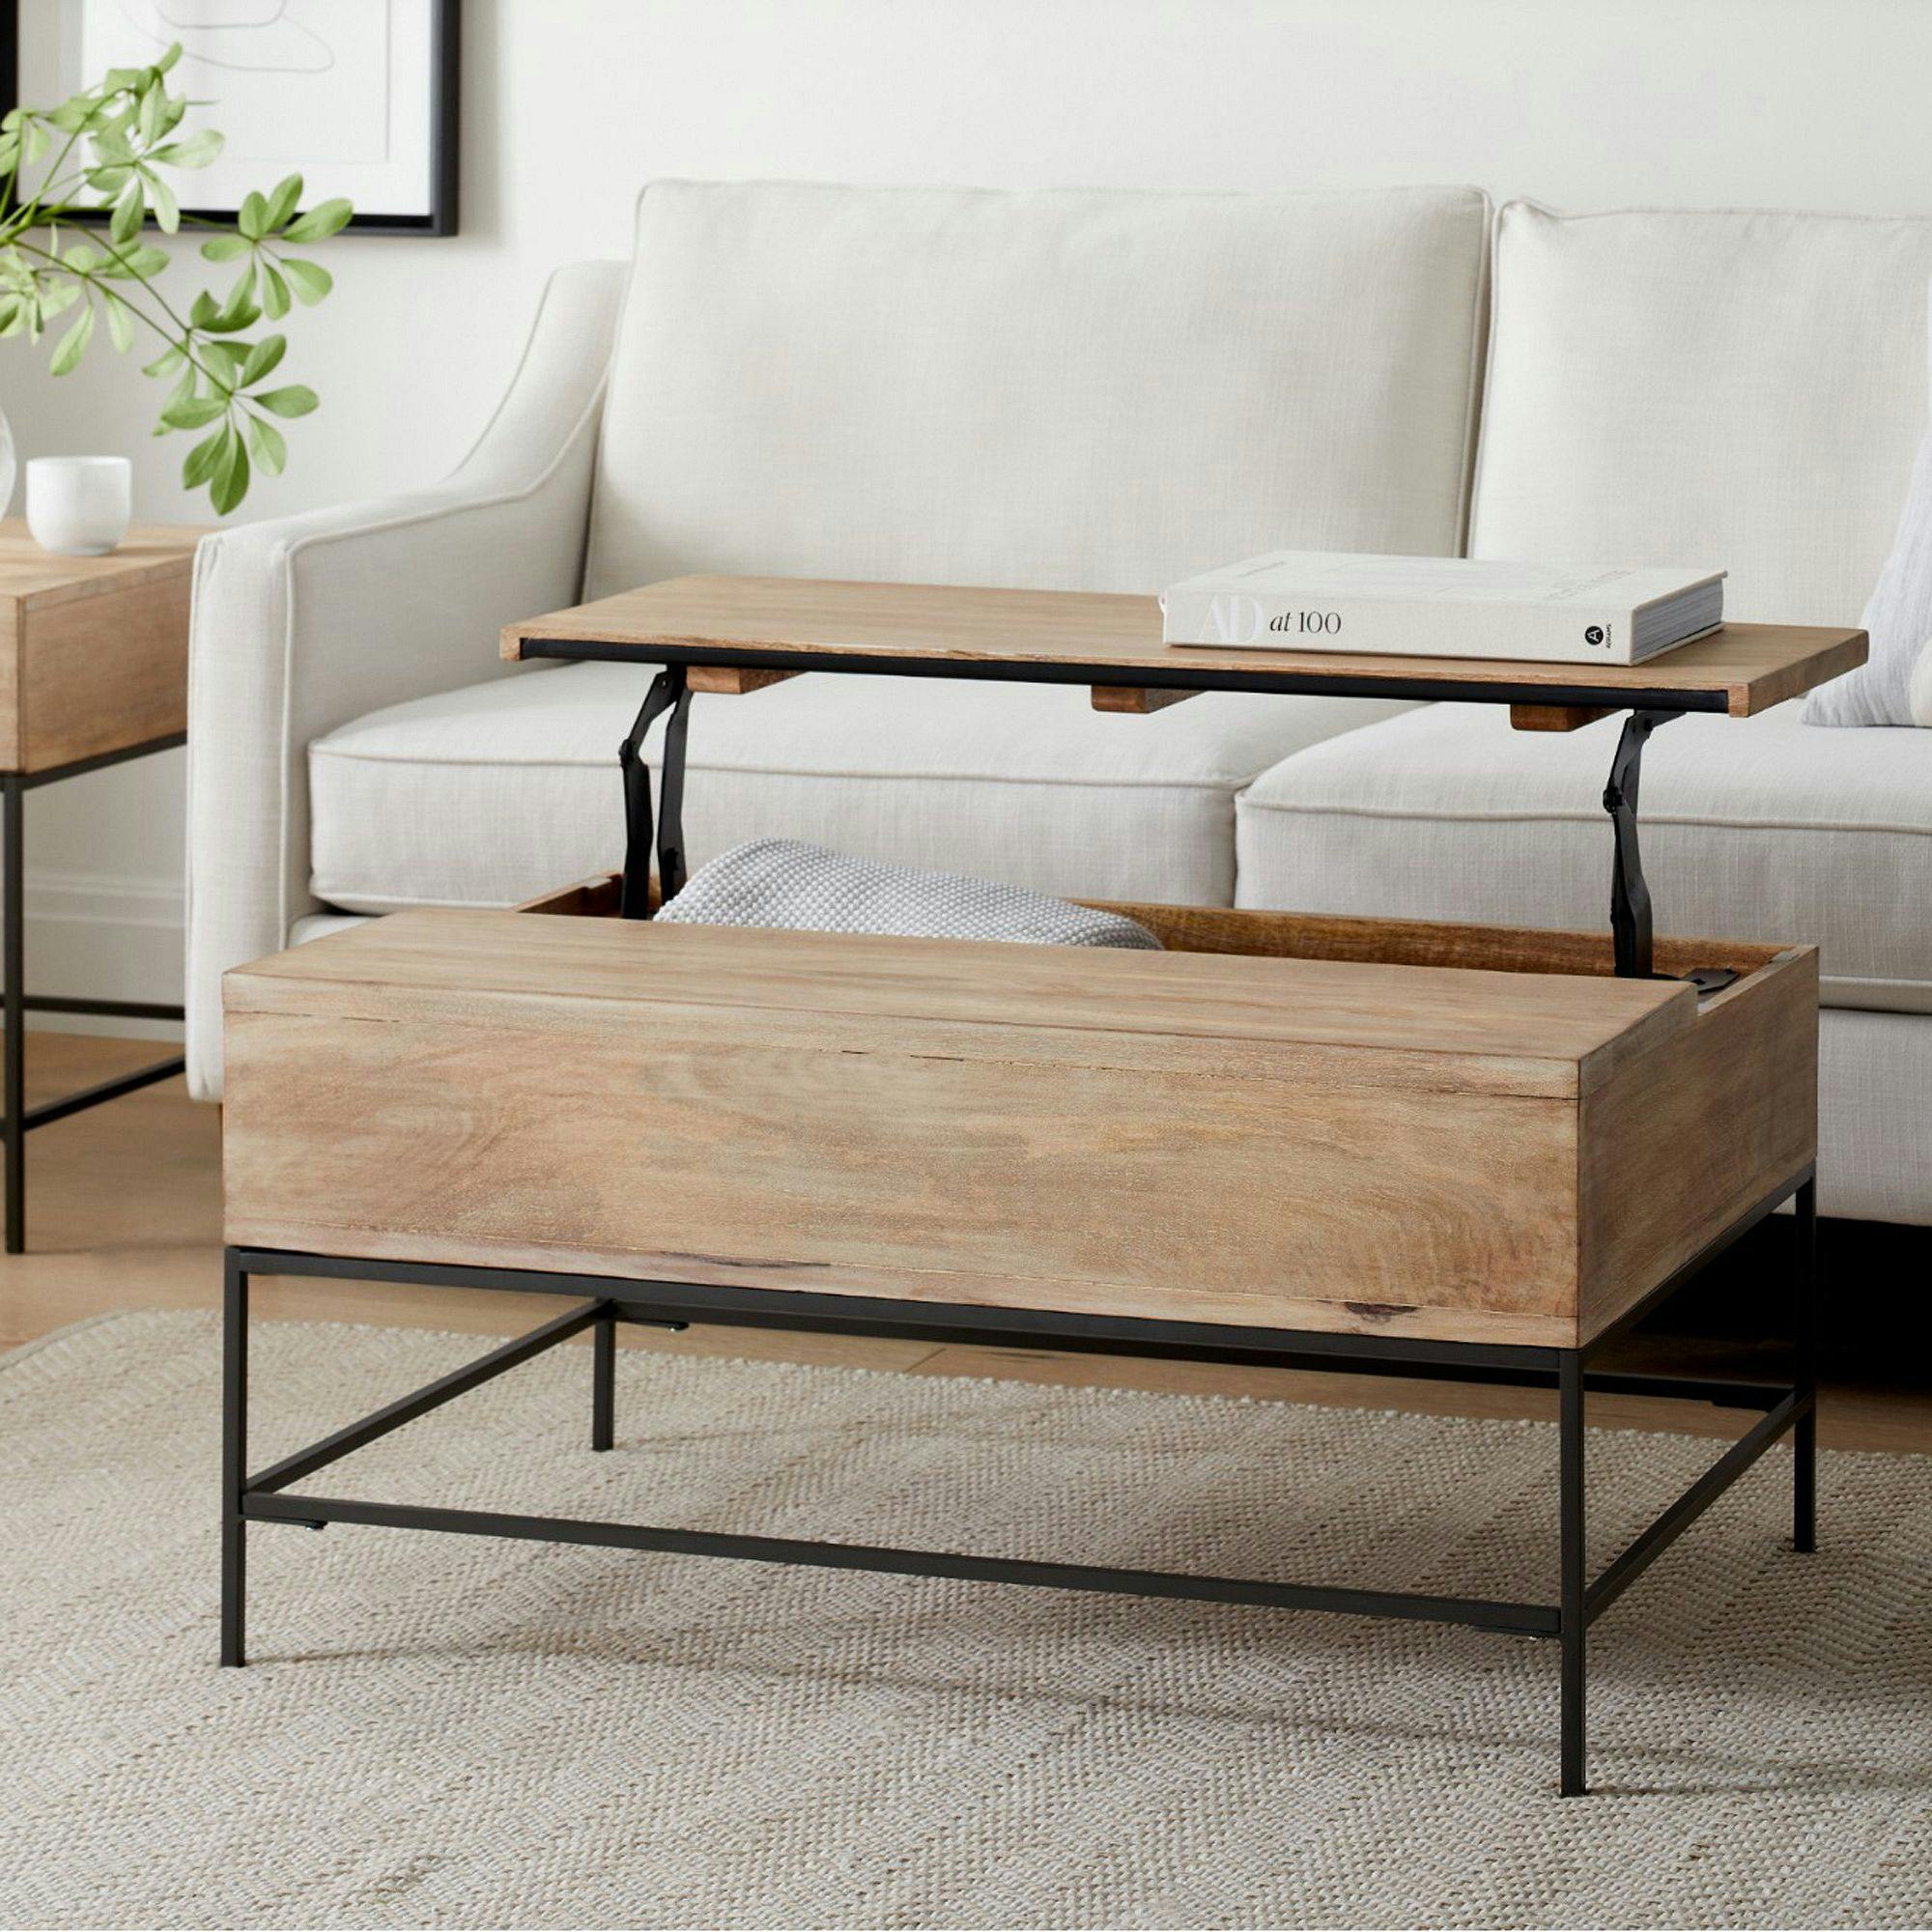  Industrial Storage Pop-Up Coffee Table from West Elm